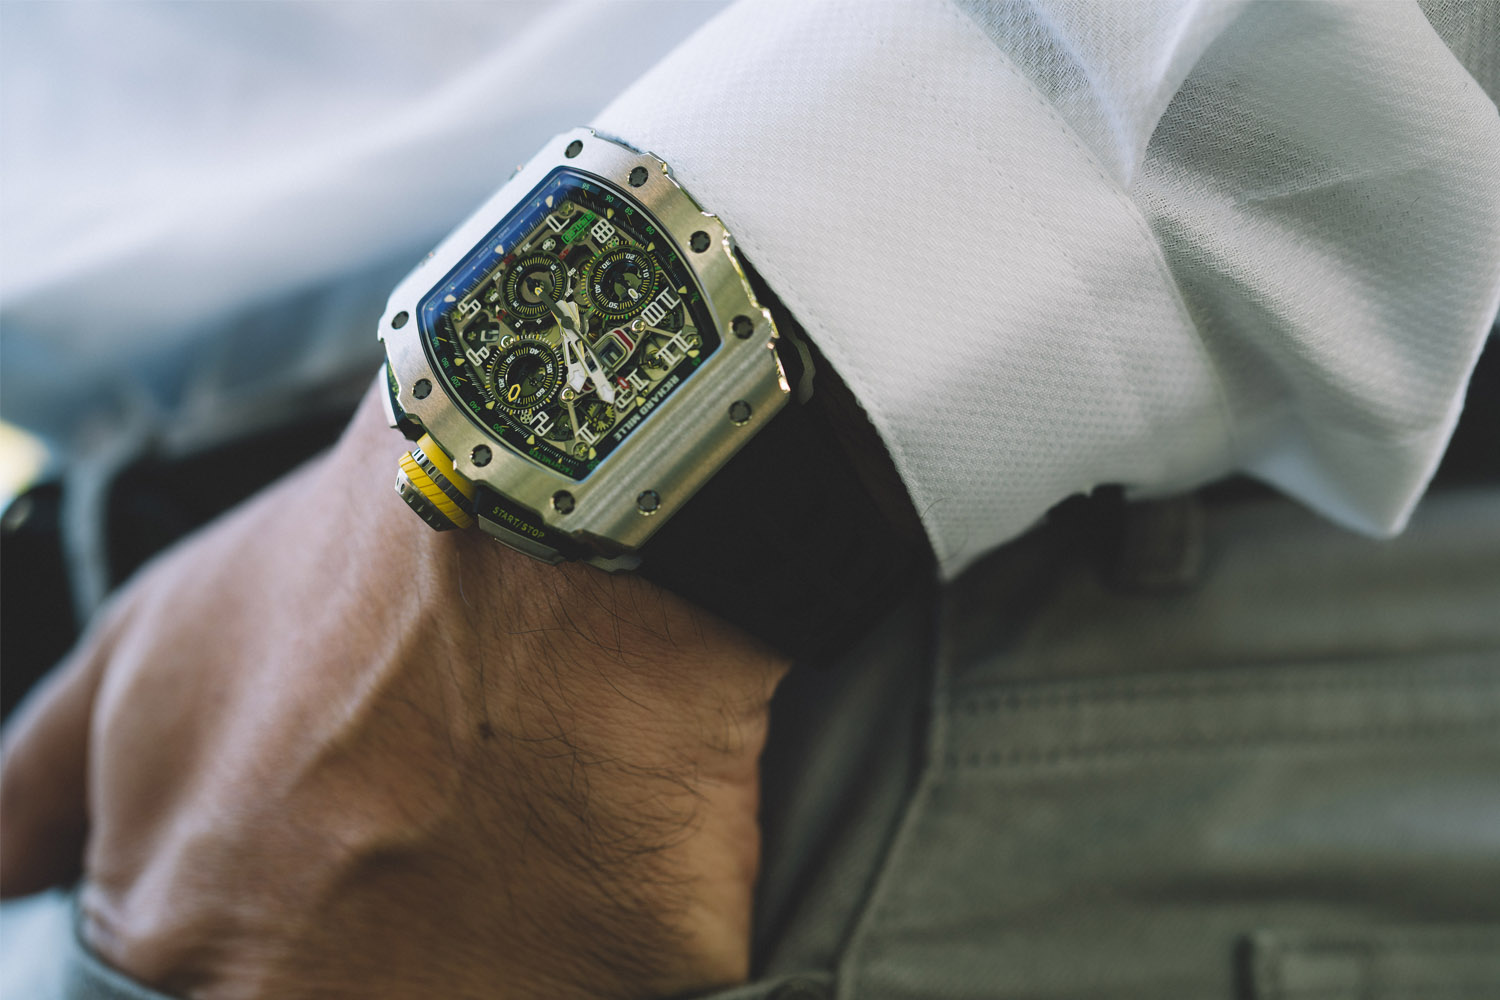 Hands-on - Richard Mille RM 11-03 Automatic Flyback Chronograph, the